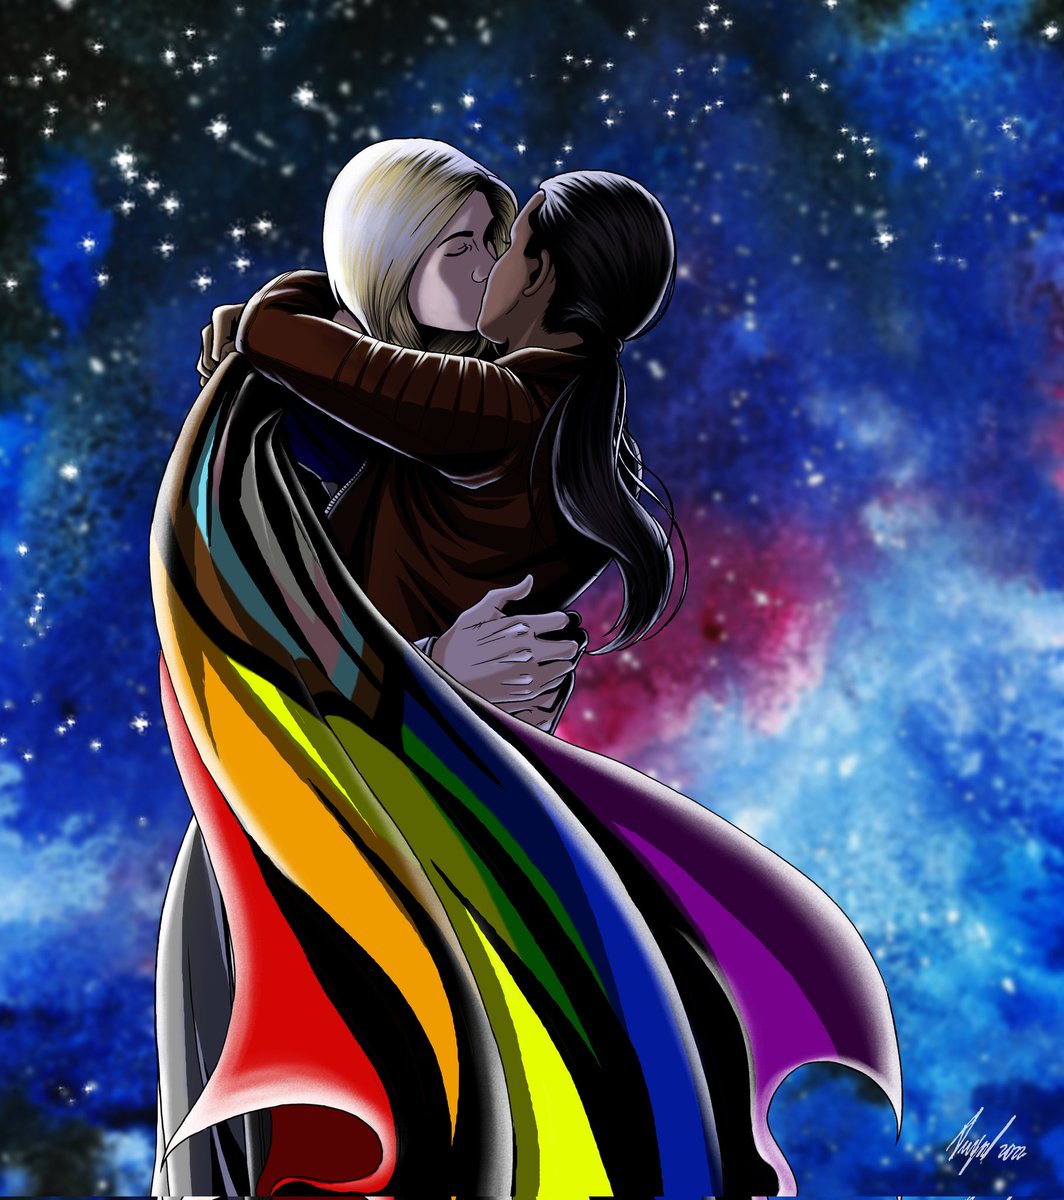 It's May 17 across the Universe

#doctorwho #jodiewhittaker #thasmin #13thdoctor #17maggio #17May #17May2023 #yasminkhan #StopHomofobia #LGBTQIA #thirteendoctor